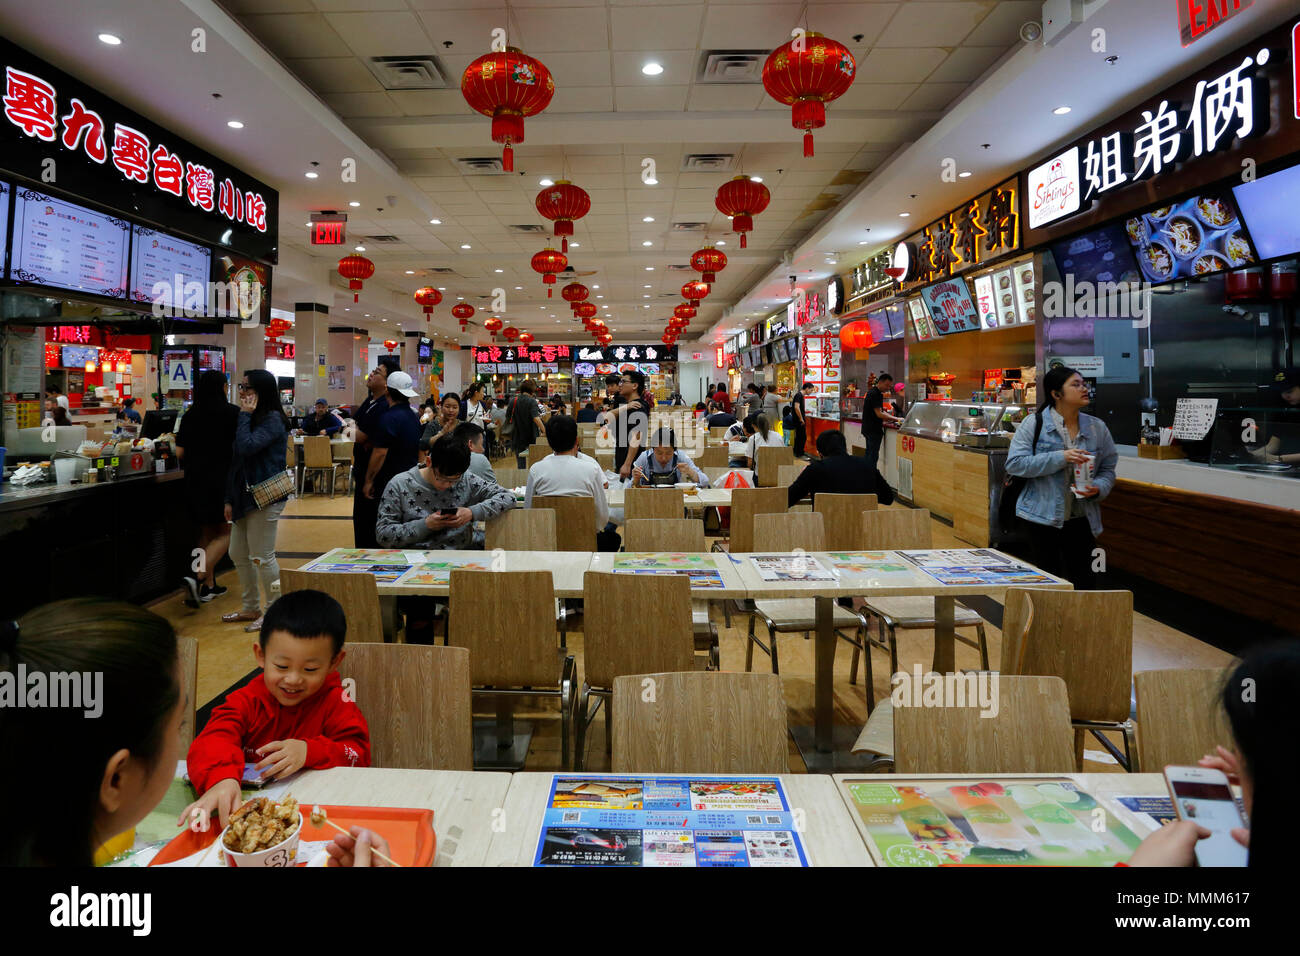 New York Food Court, 133-35 Roosevelt Ave, Queens, New York. interior of a food court in Downtown Flushing Chinatown. 法拉盛, 法拉盛華埠, 紐約 Stock Photo